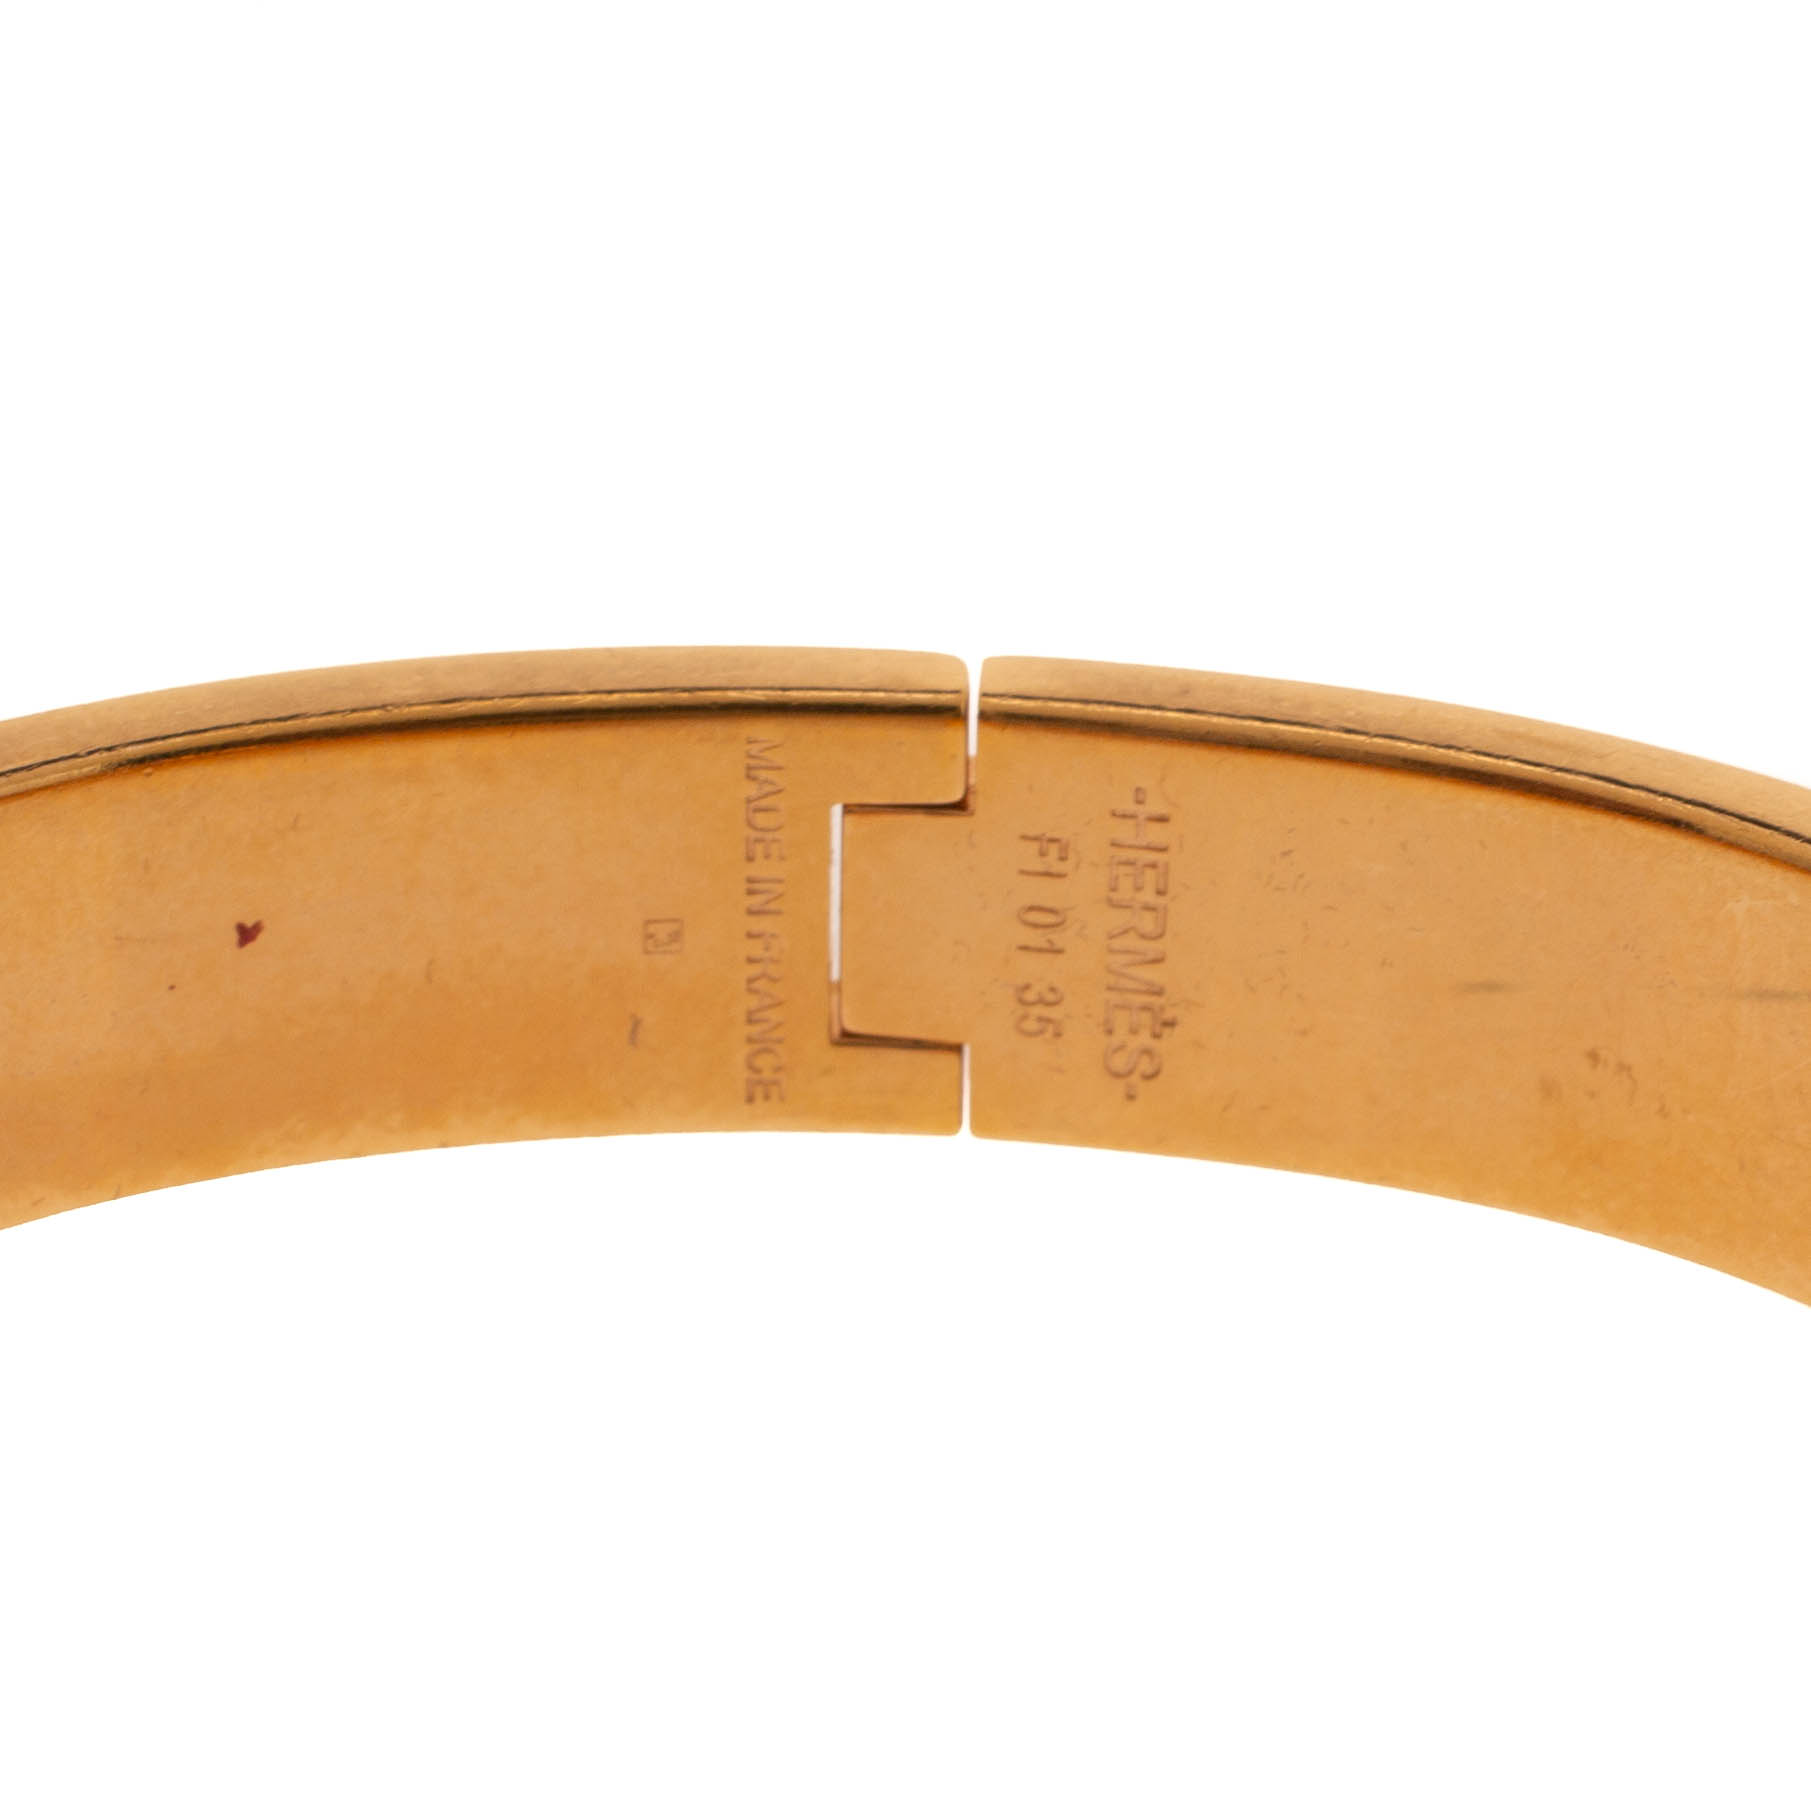 Hermes Narrow Clic H Bracelet (Rose Dragee/Yellow Gold Plated) - PM -  ShopStyle